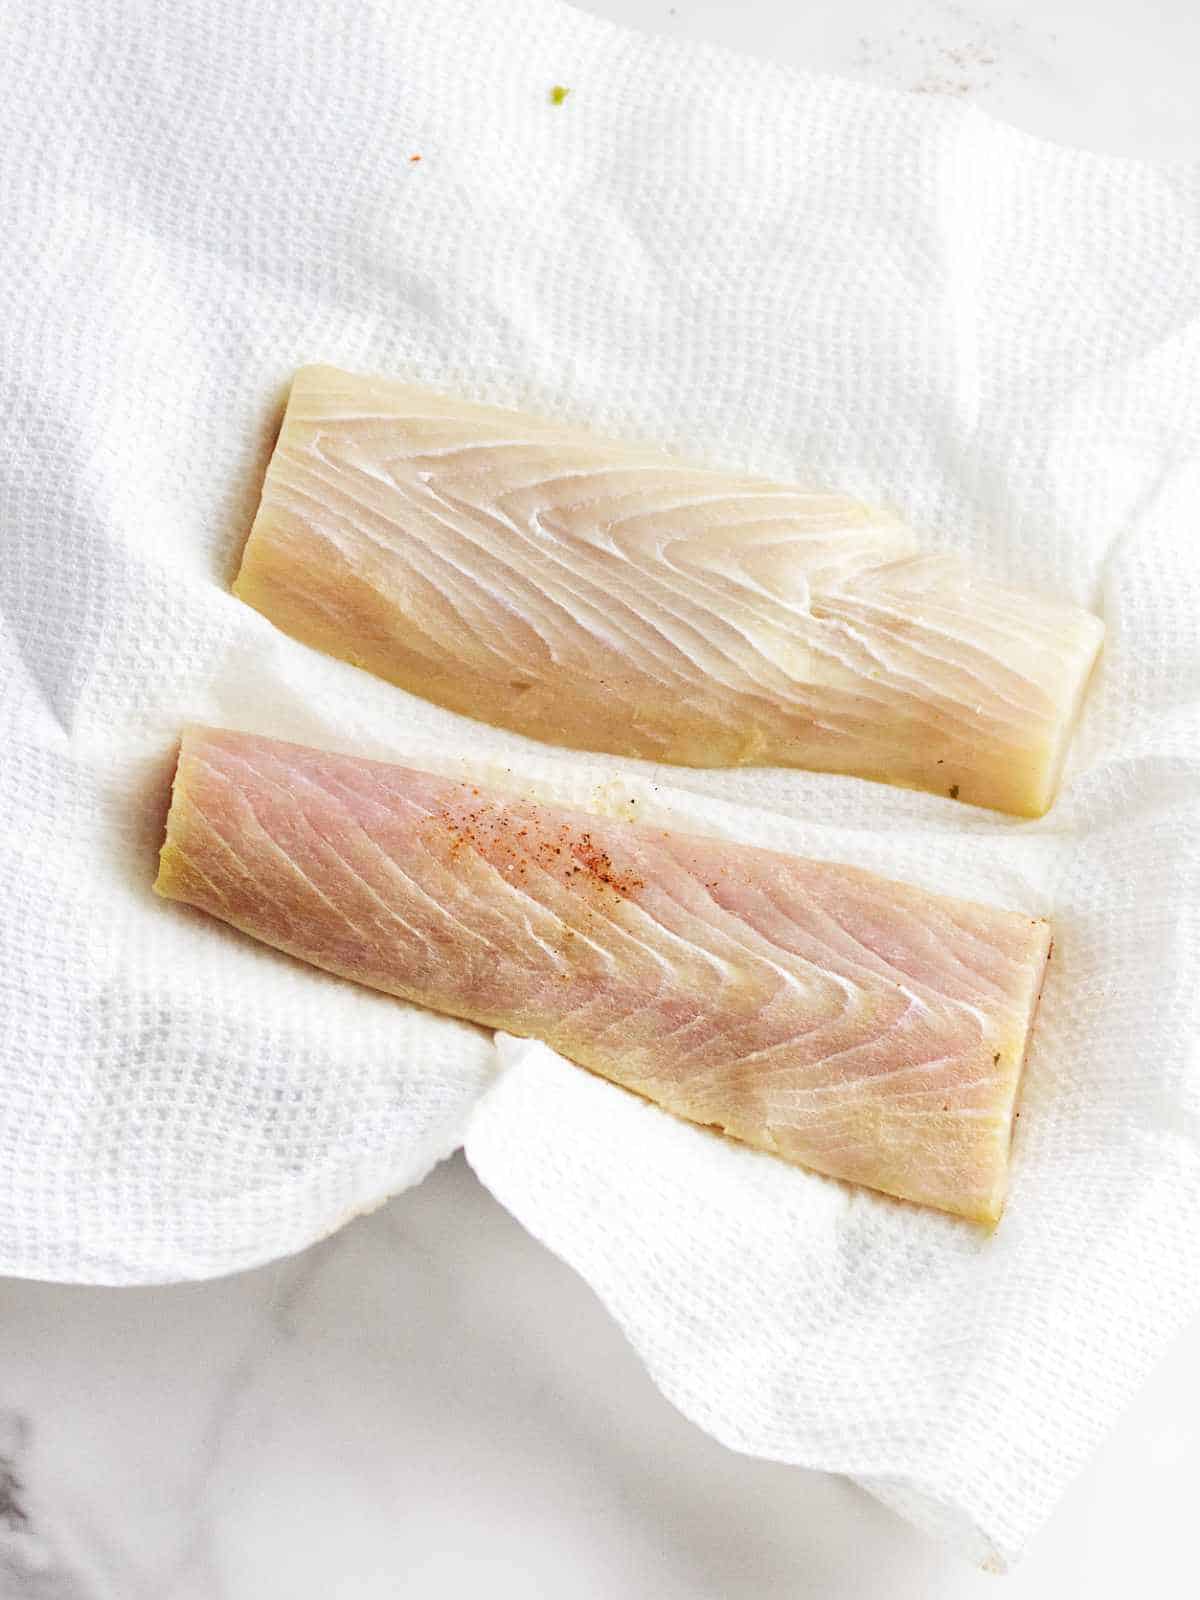 fish fillets on paper towels to blot dry.